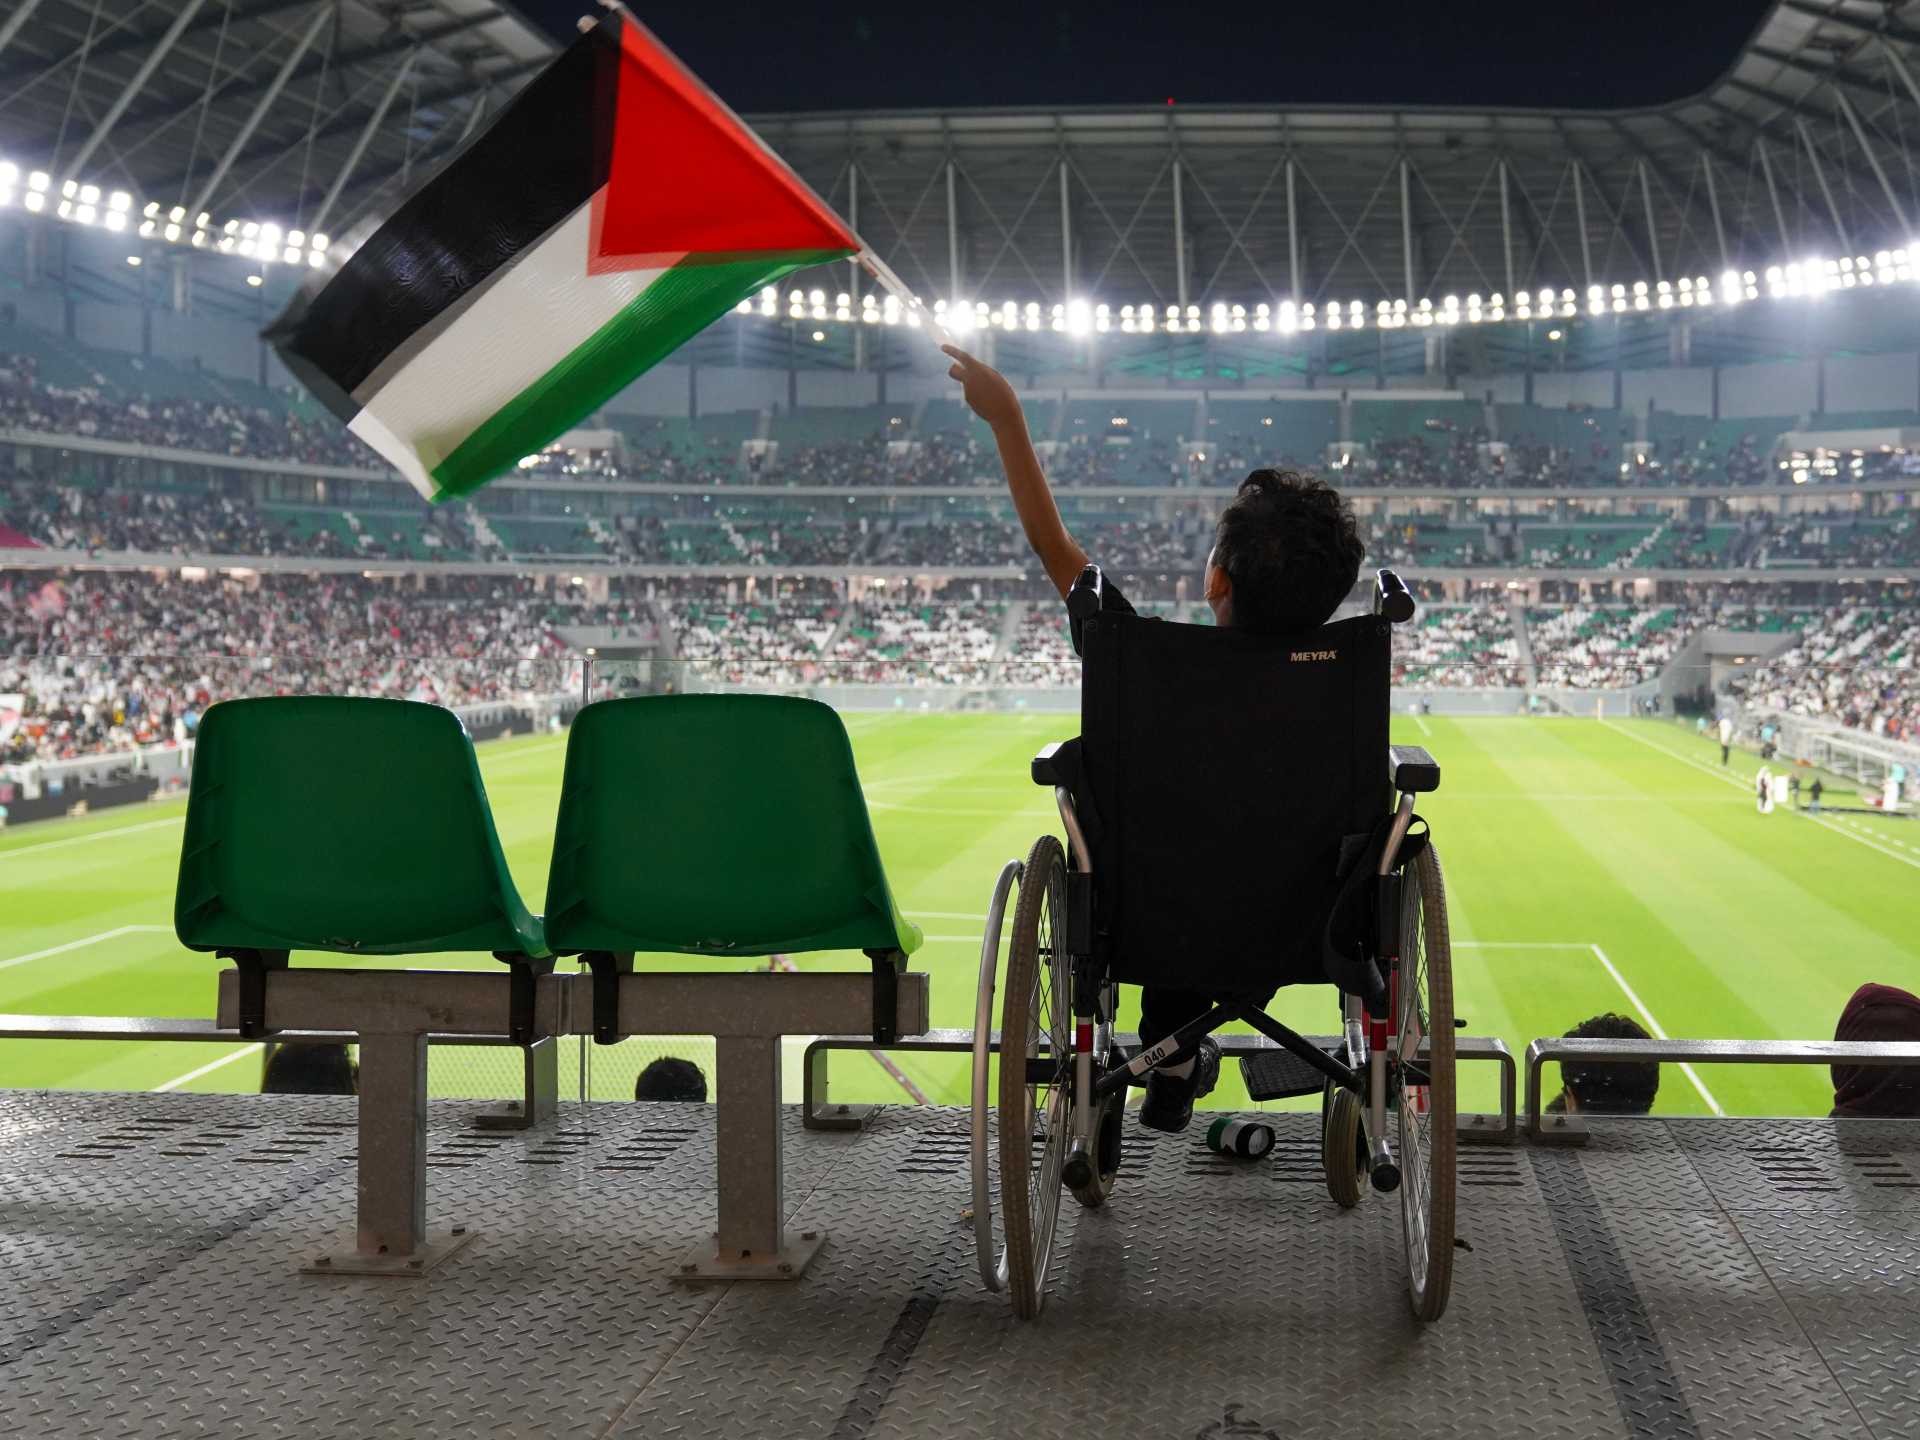 ‘No place for genocide’: Qatar football fans stand for Gaza against Israel | Israel-Palestine conflict News